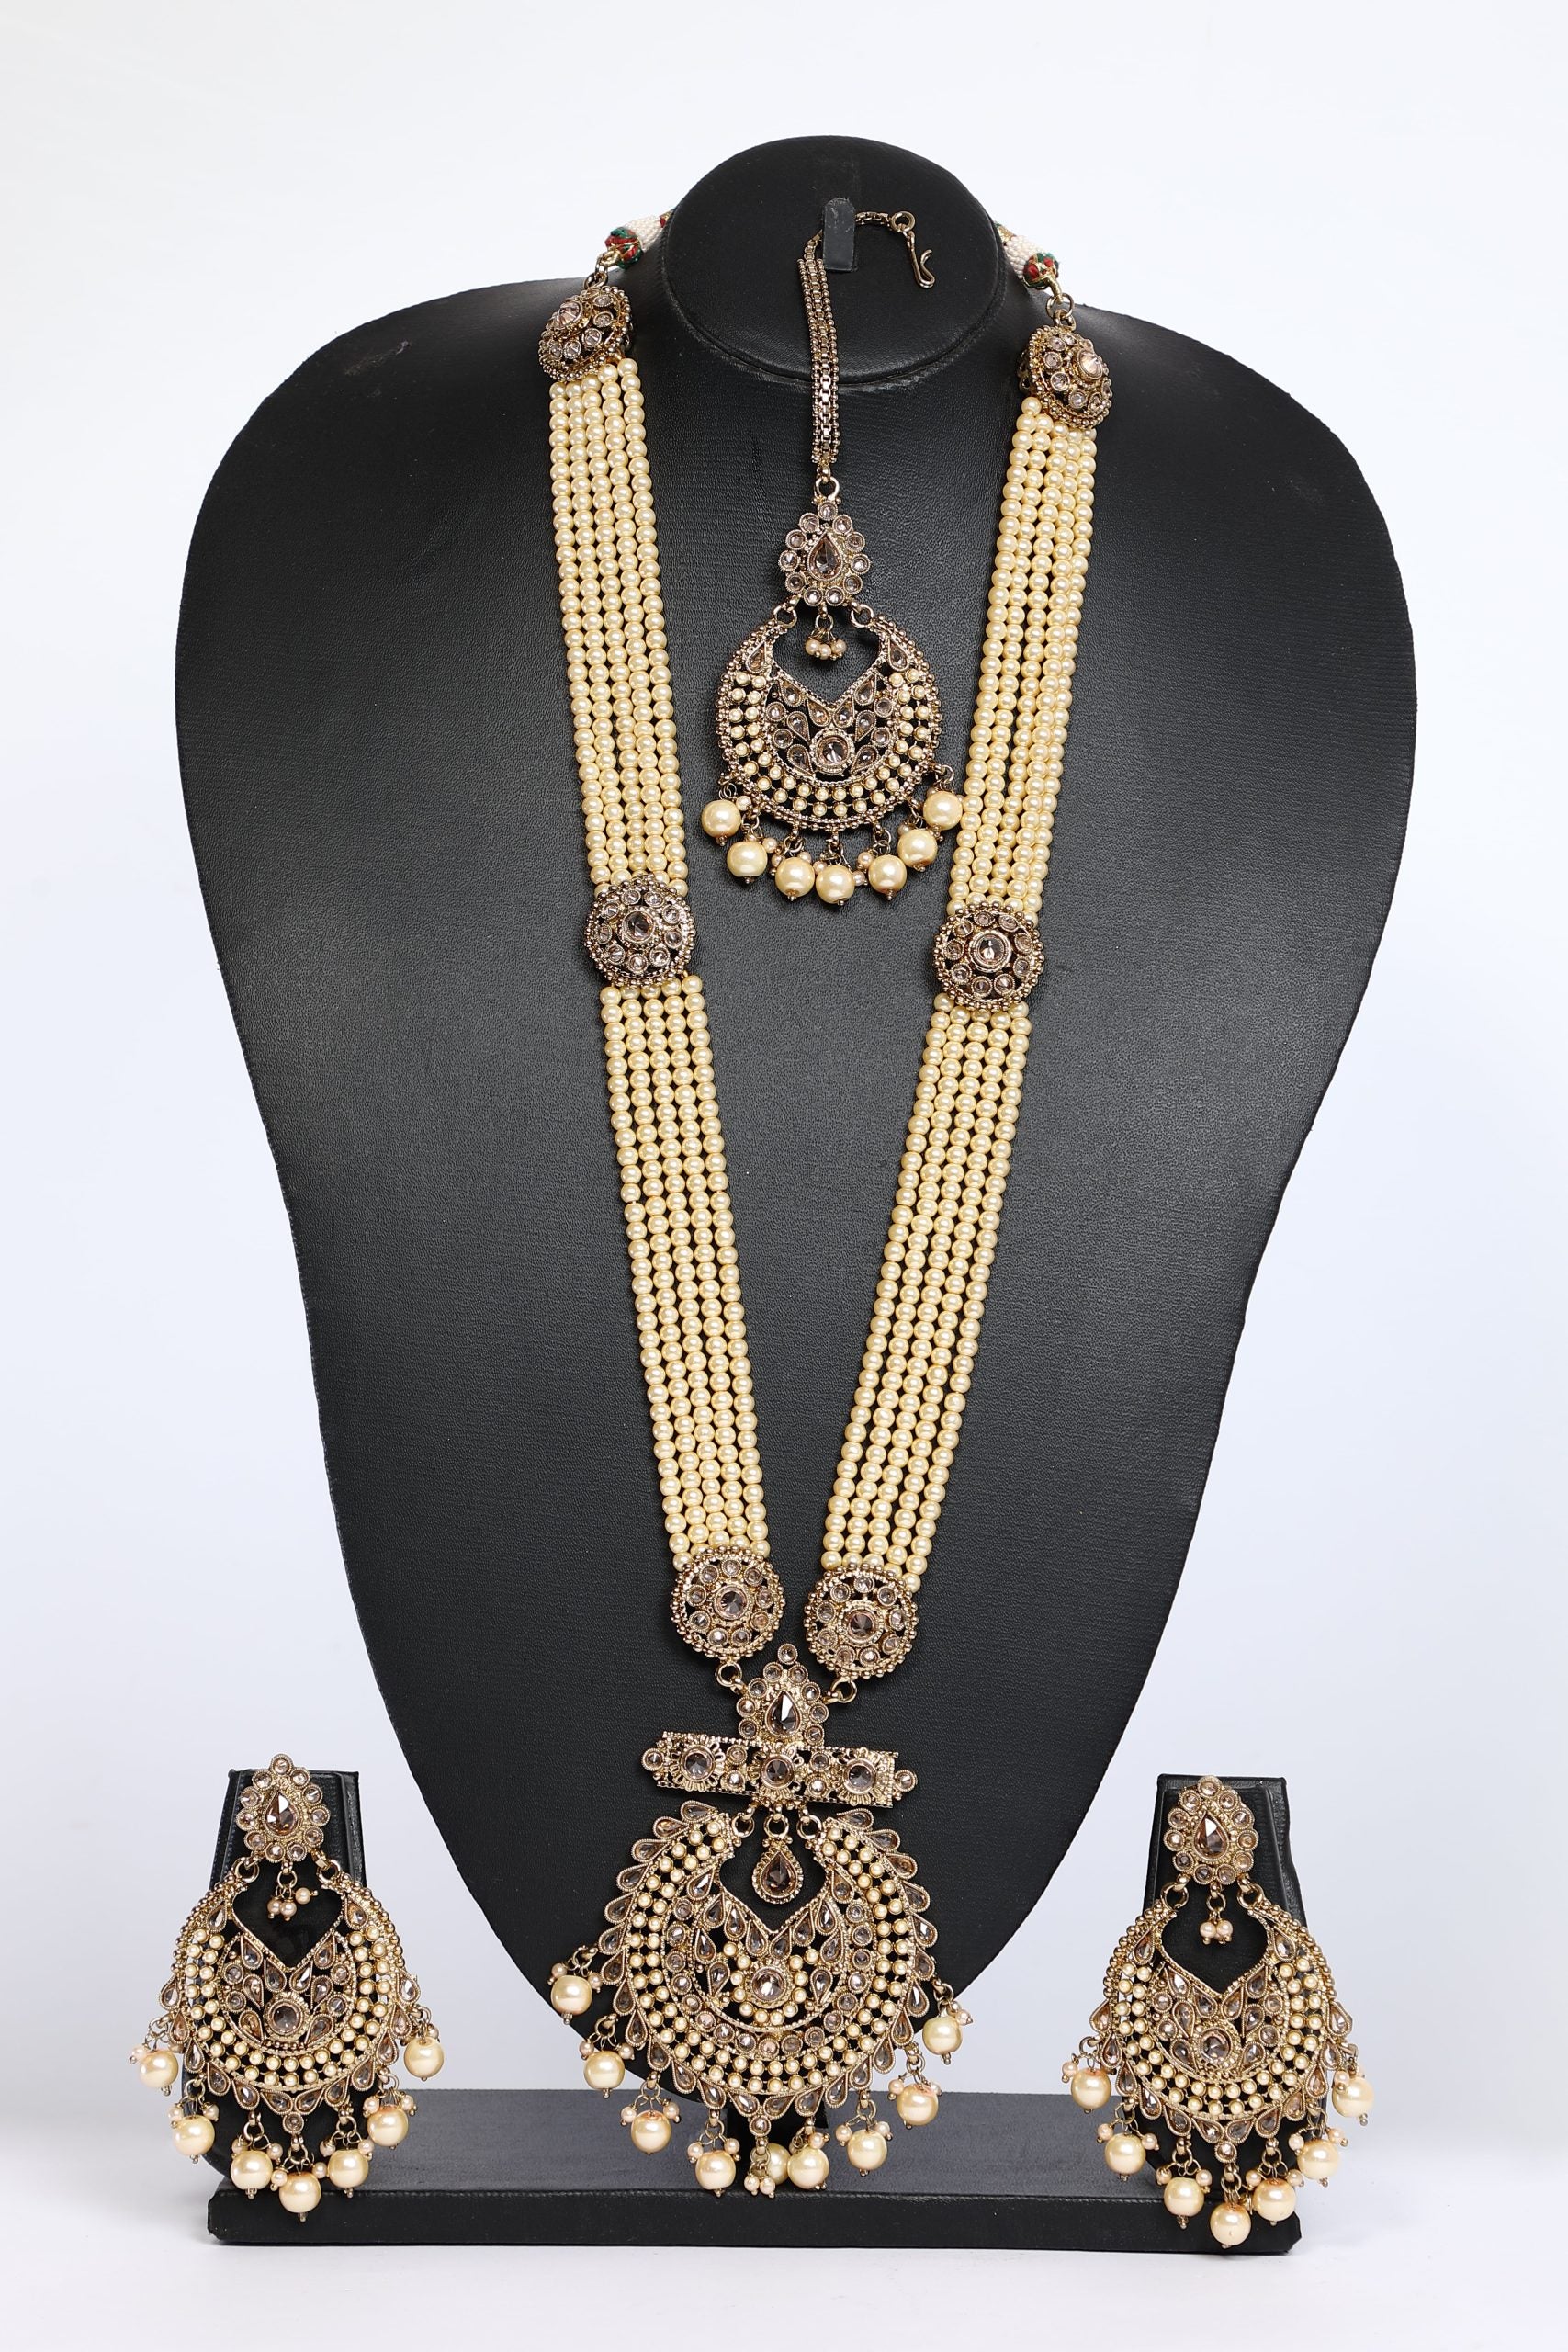 Beaded Heavy Long Necklace Set in Cream Color For Bridal – 3596